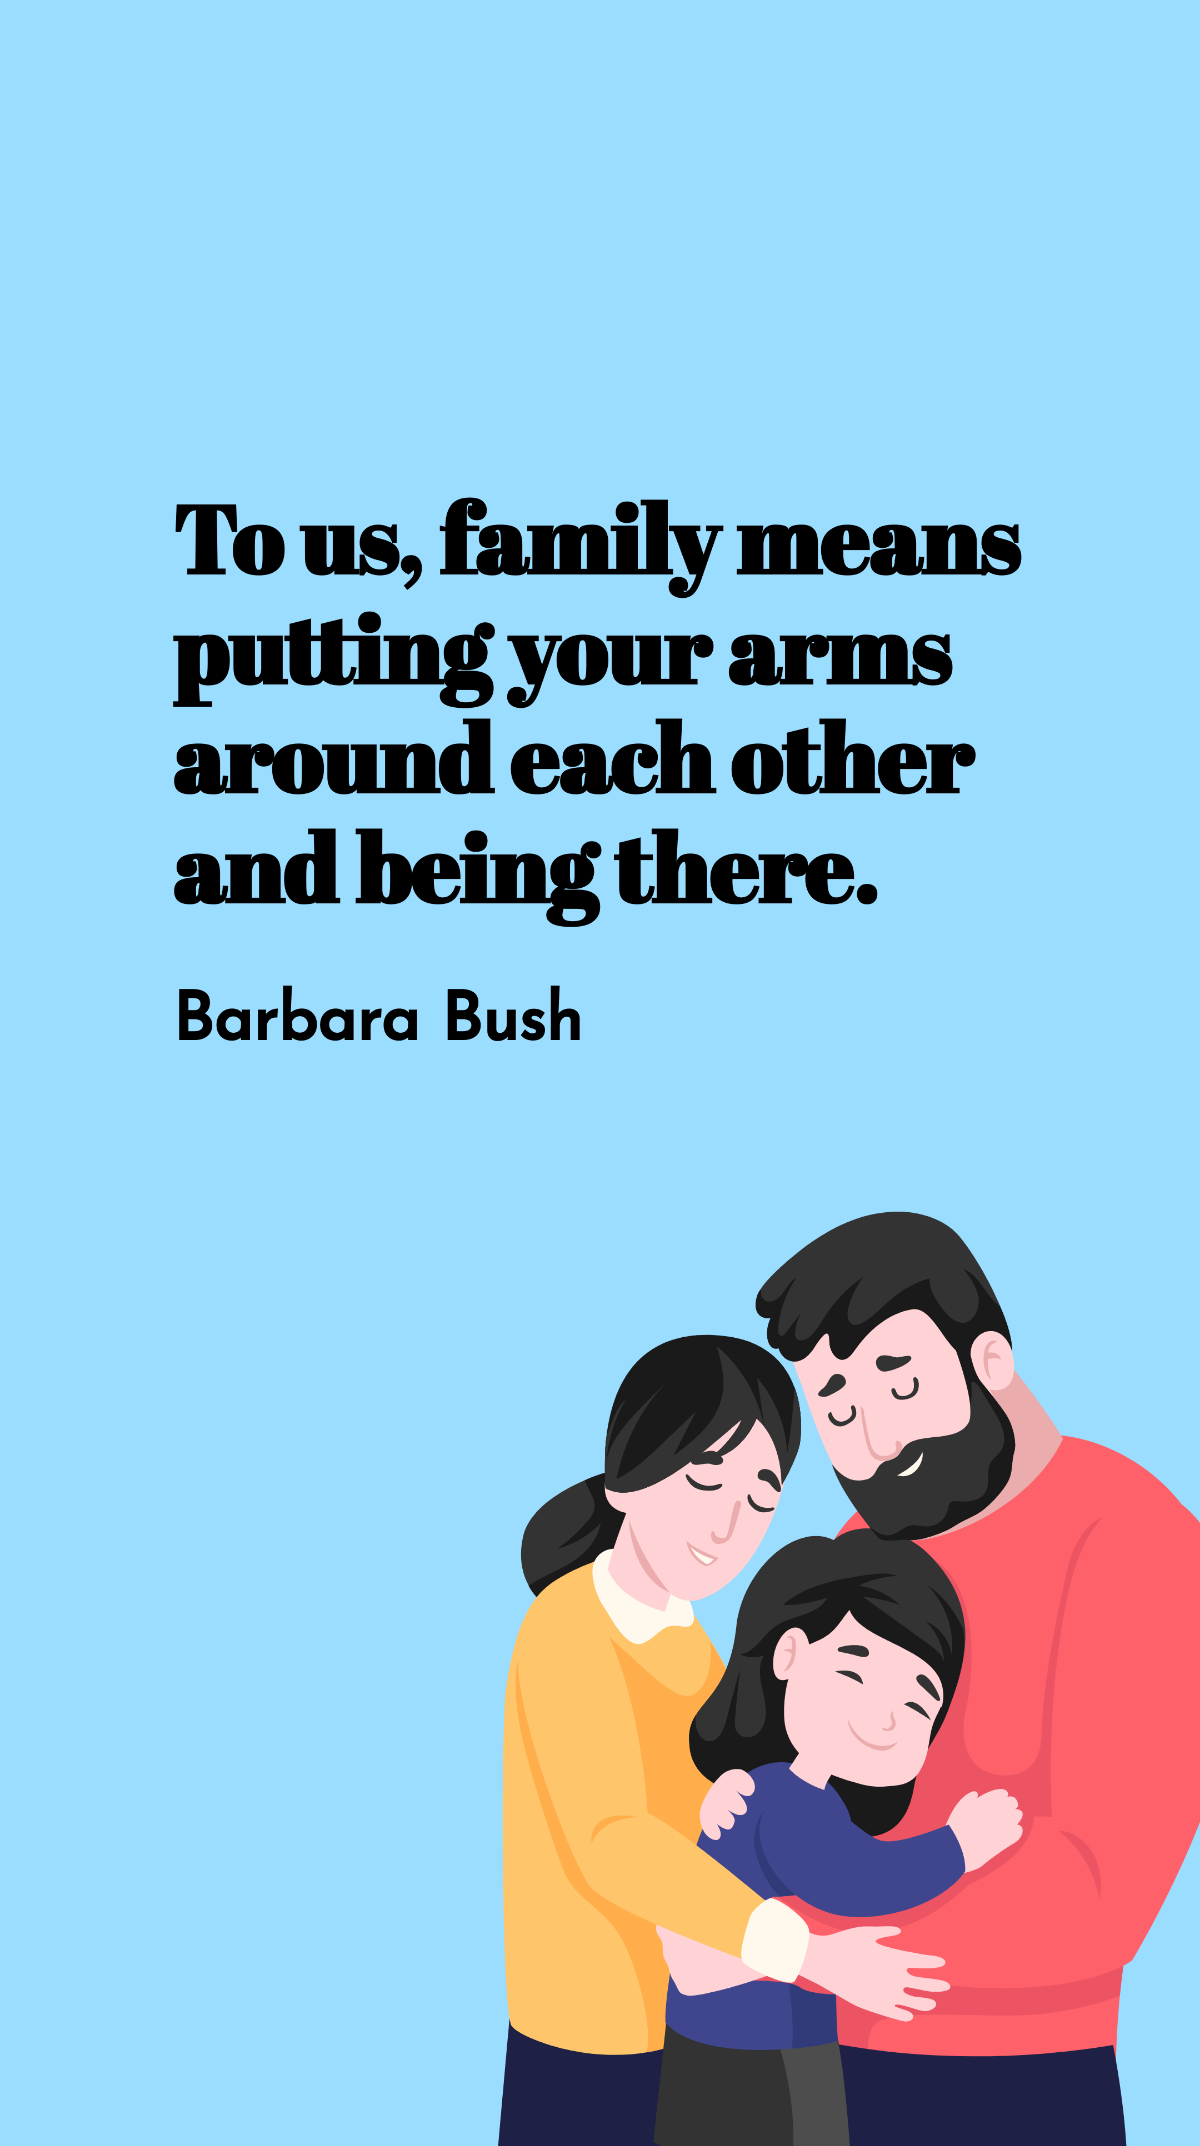 Barbara Bush - To us, family means putting your arms around each other and being there.